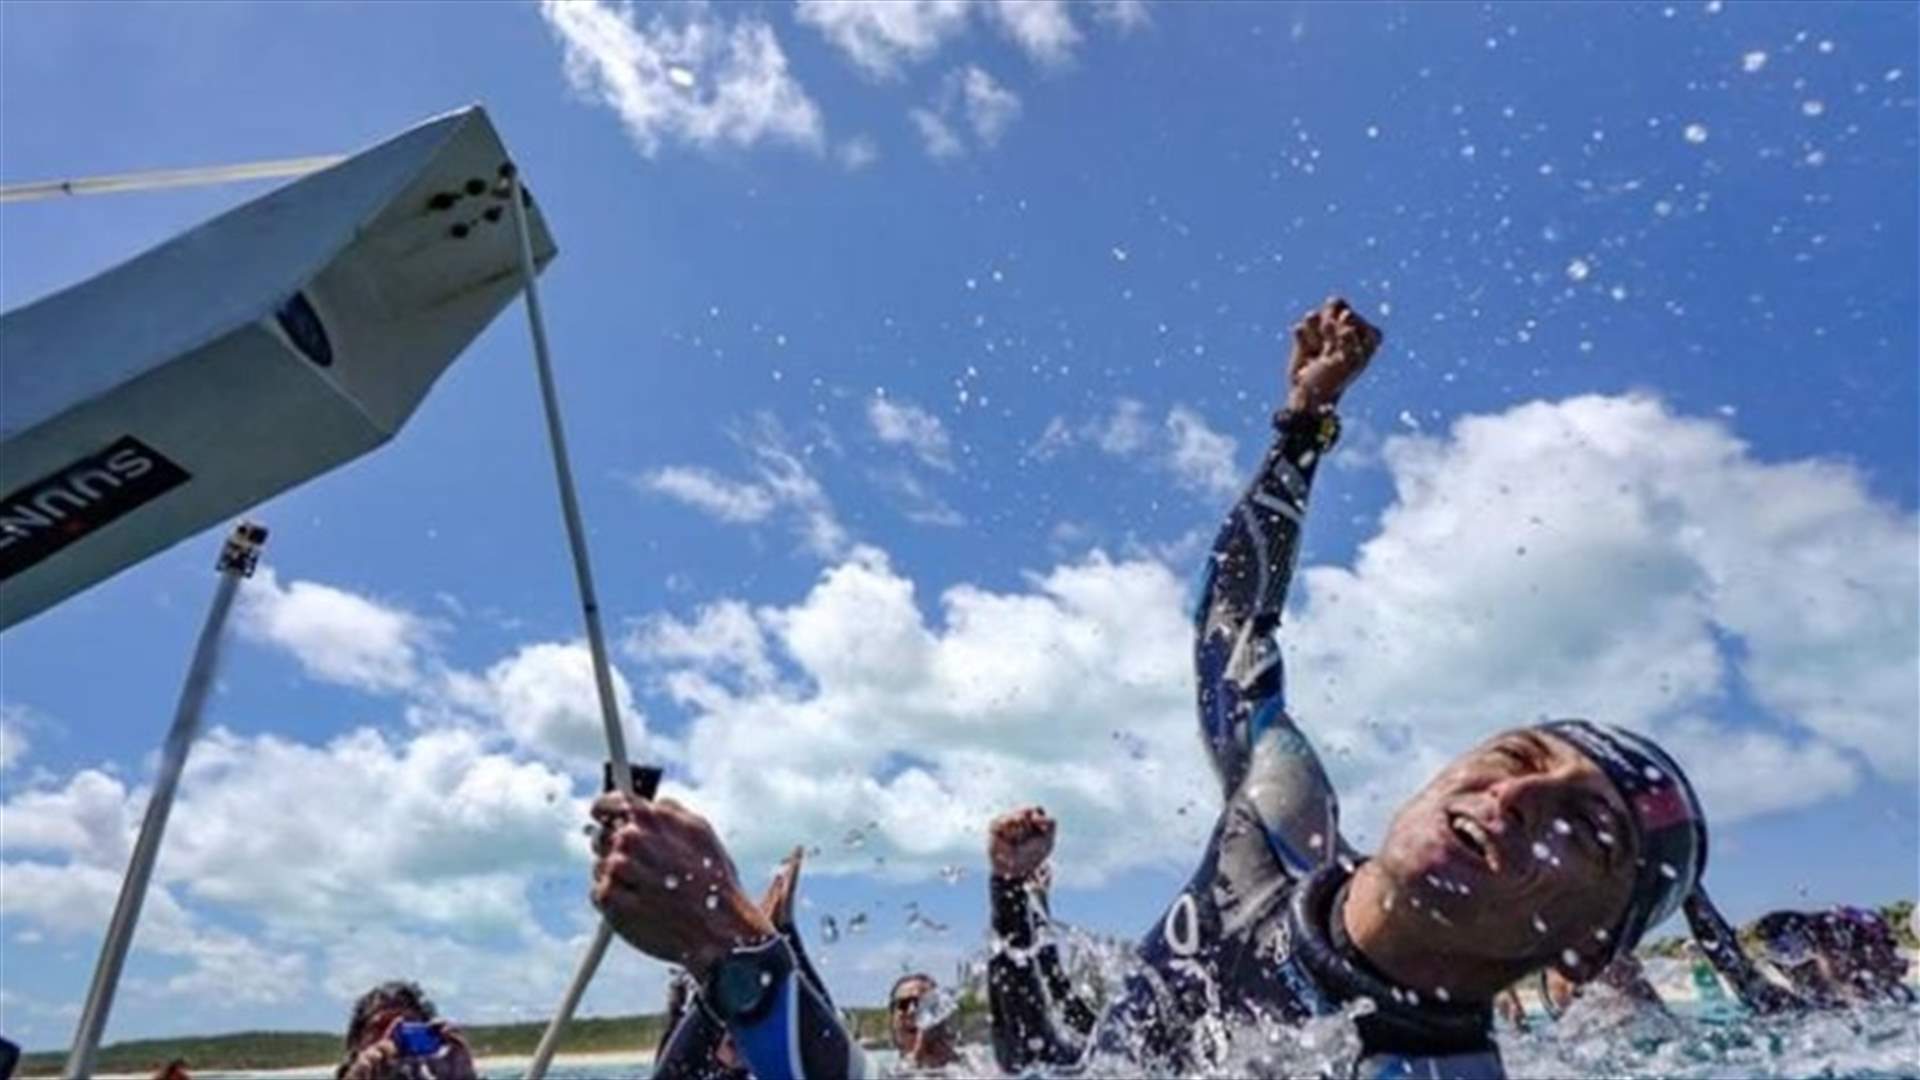 [PHOTOS] Man Breaks World Record For Free Diving